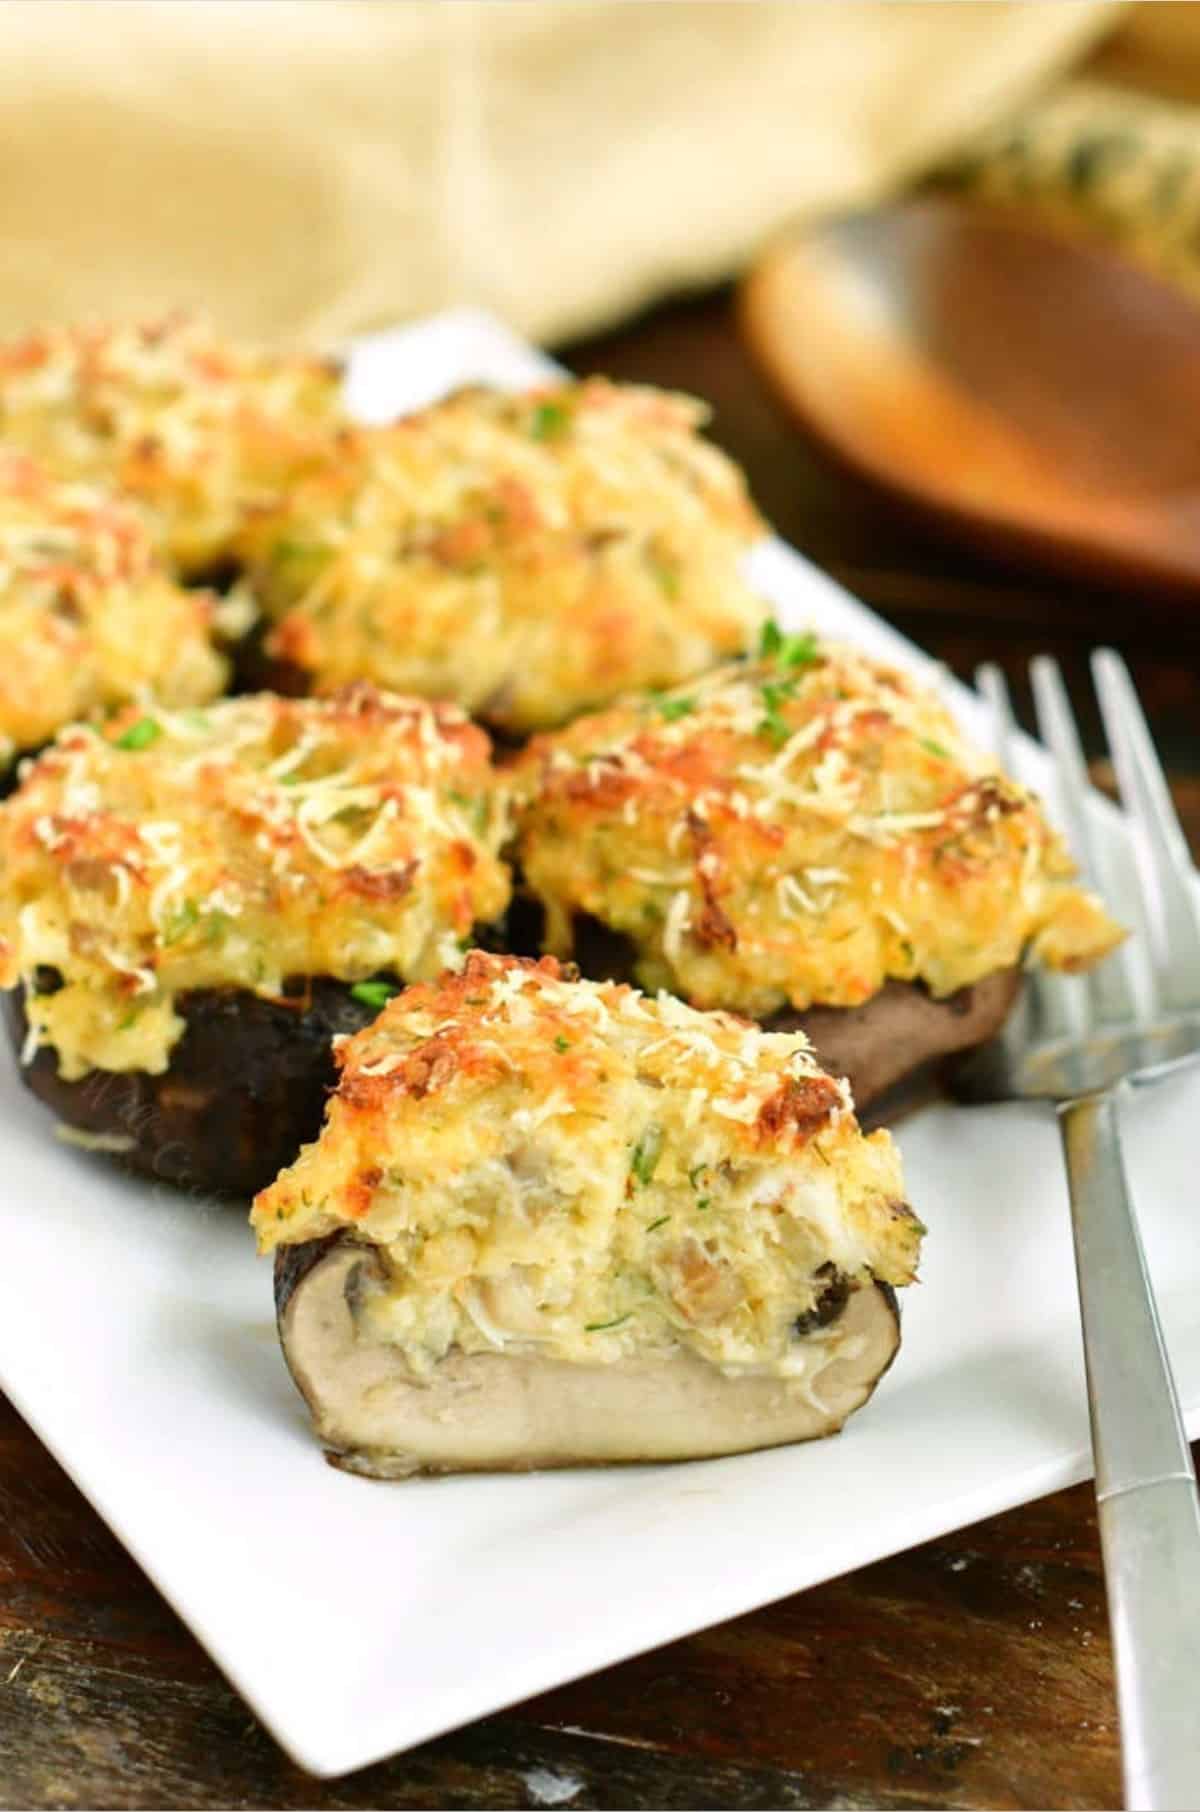 stuffed mushrooms on a white plate and first mushroom cut in half with a fork next to it.